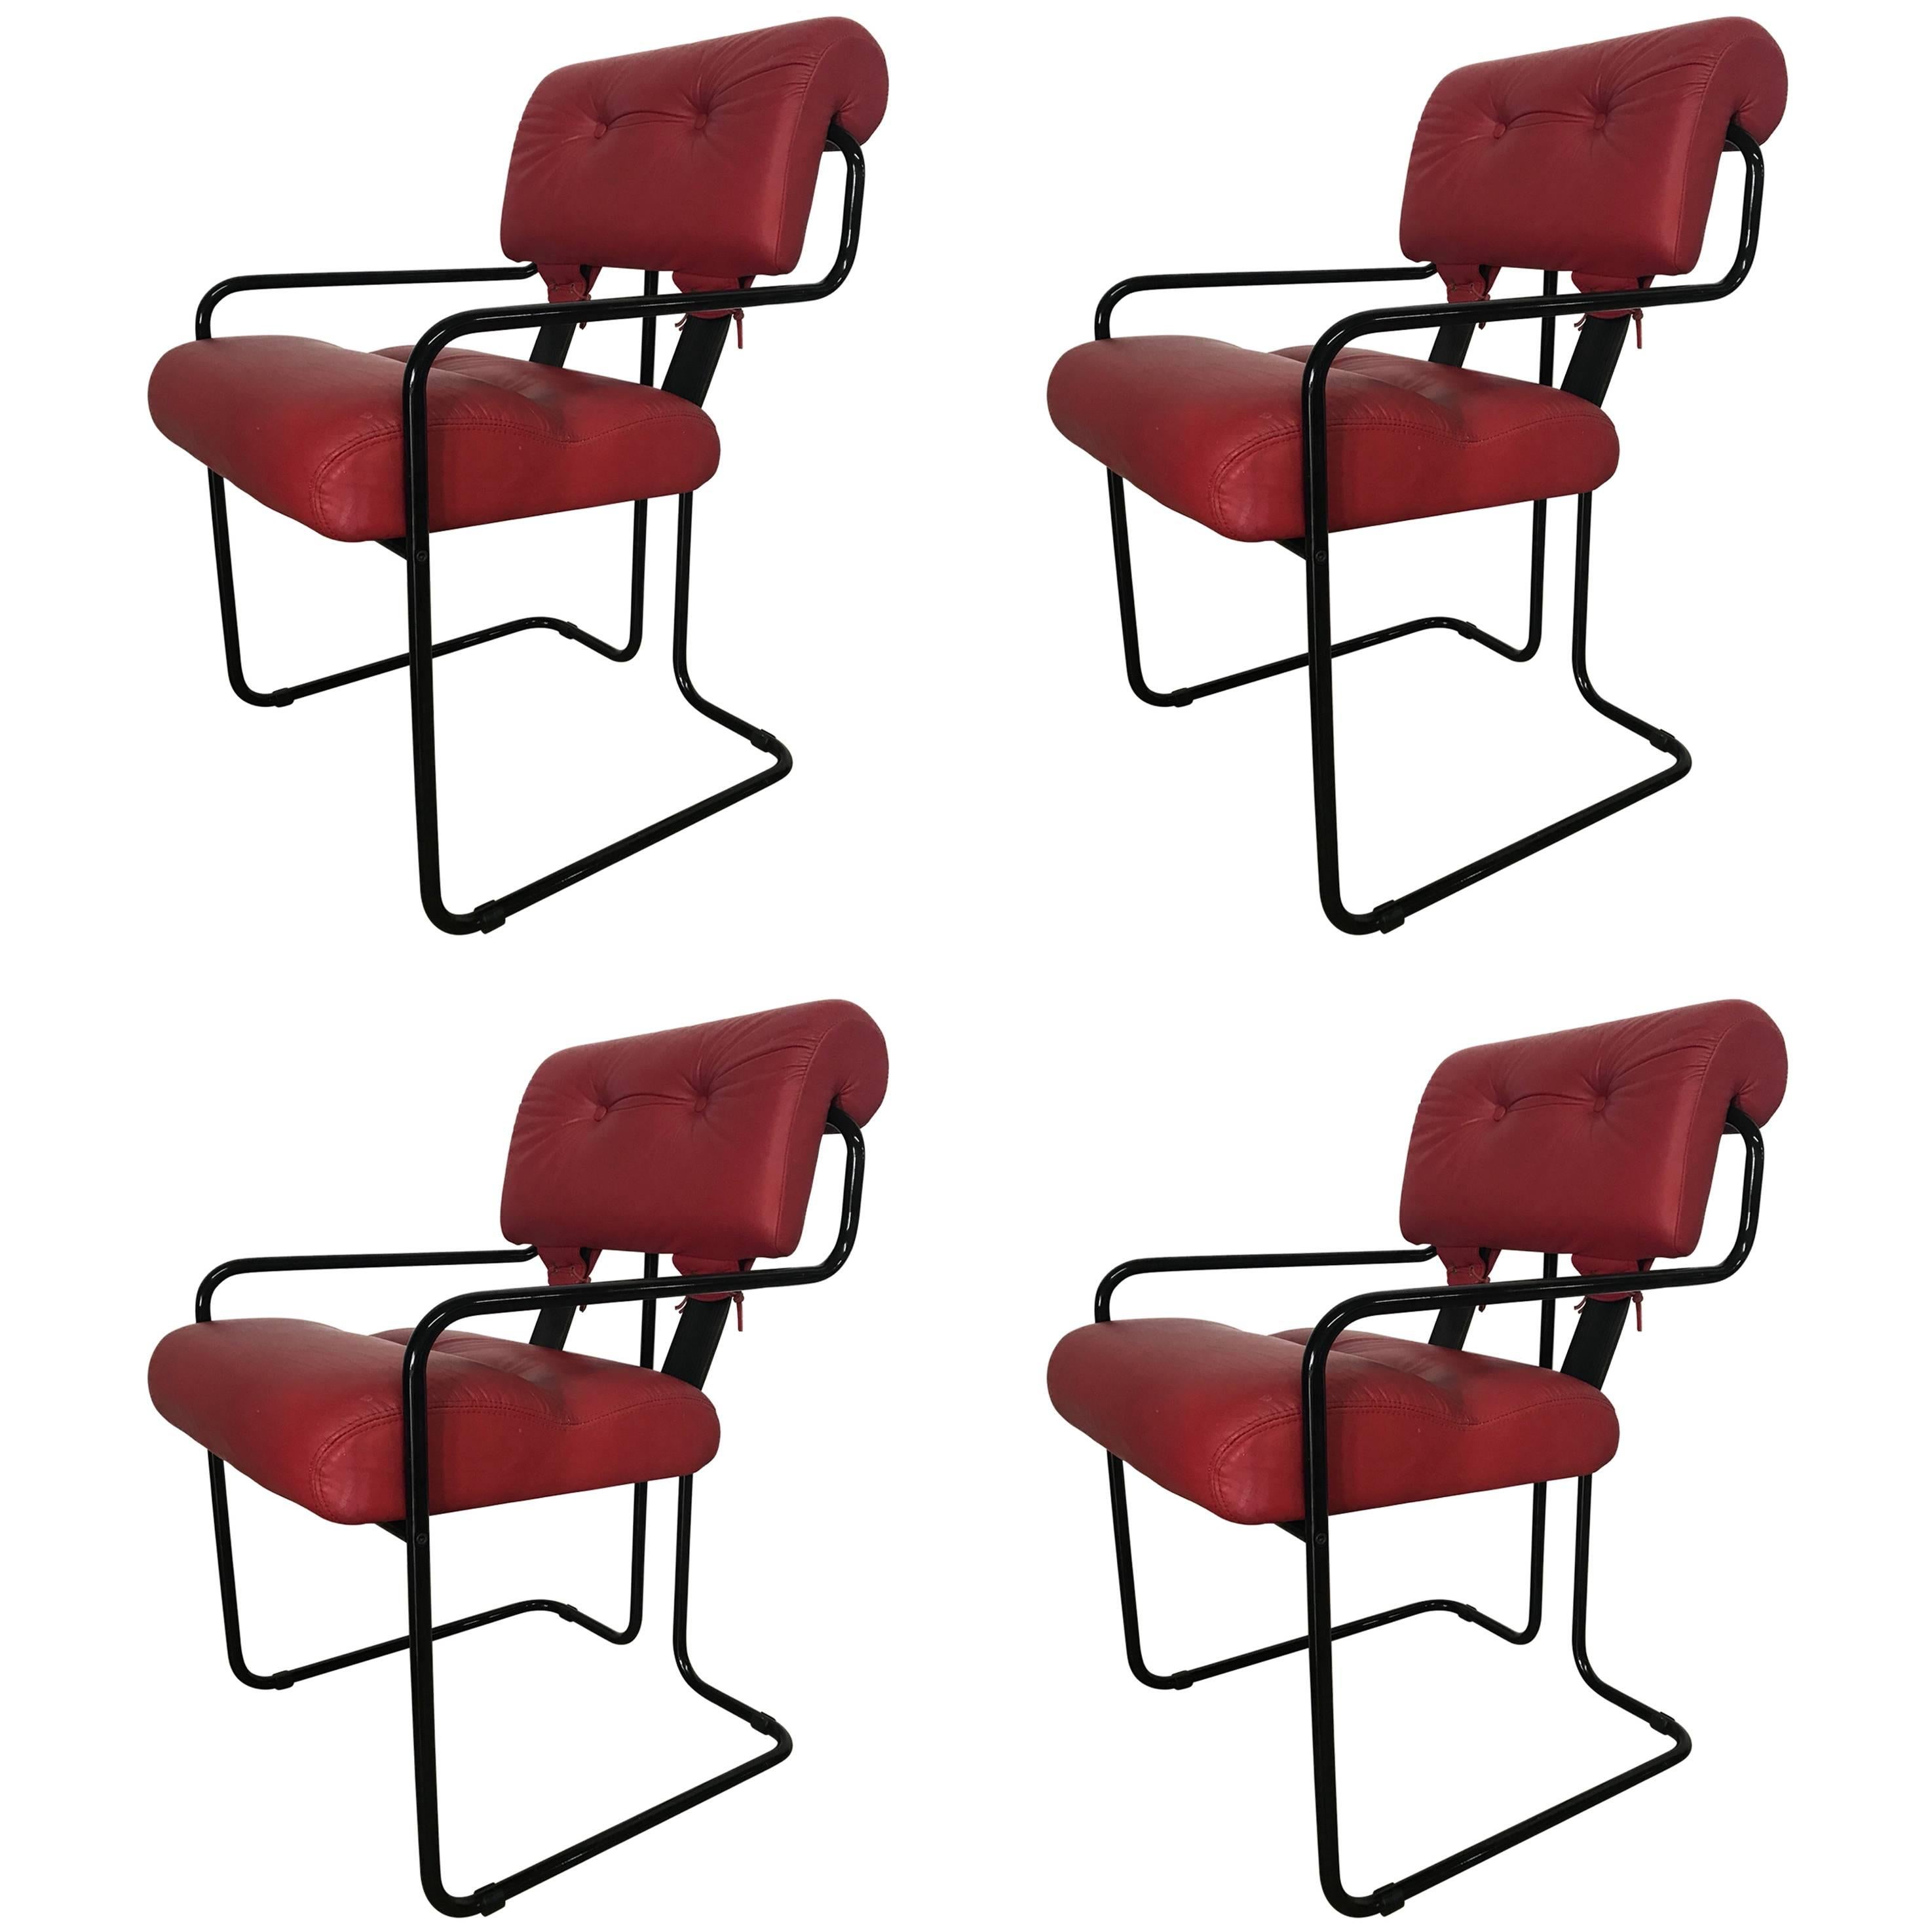 Rare Set of Four “Tucroma” Chairs by Guido Faleschini for Pace Collection